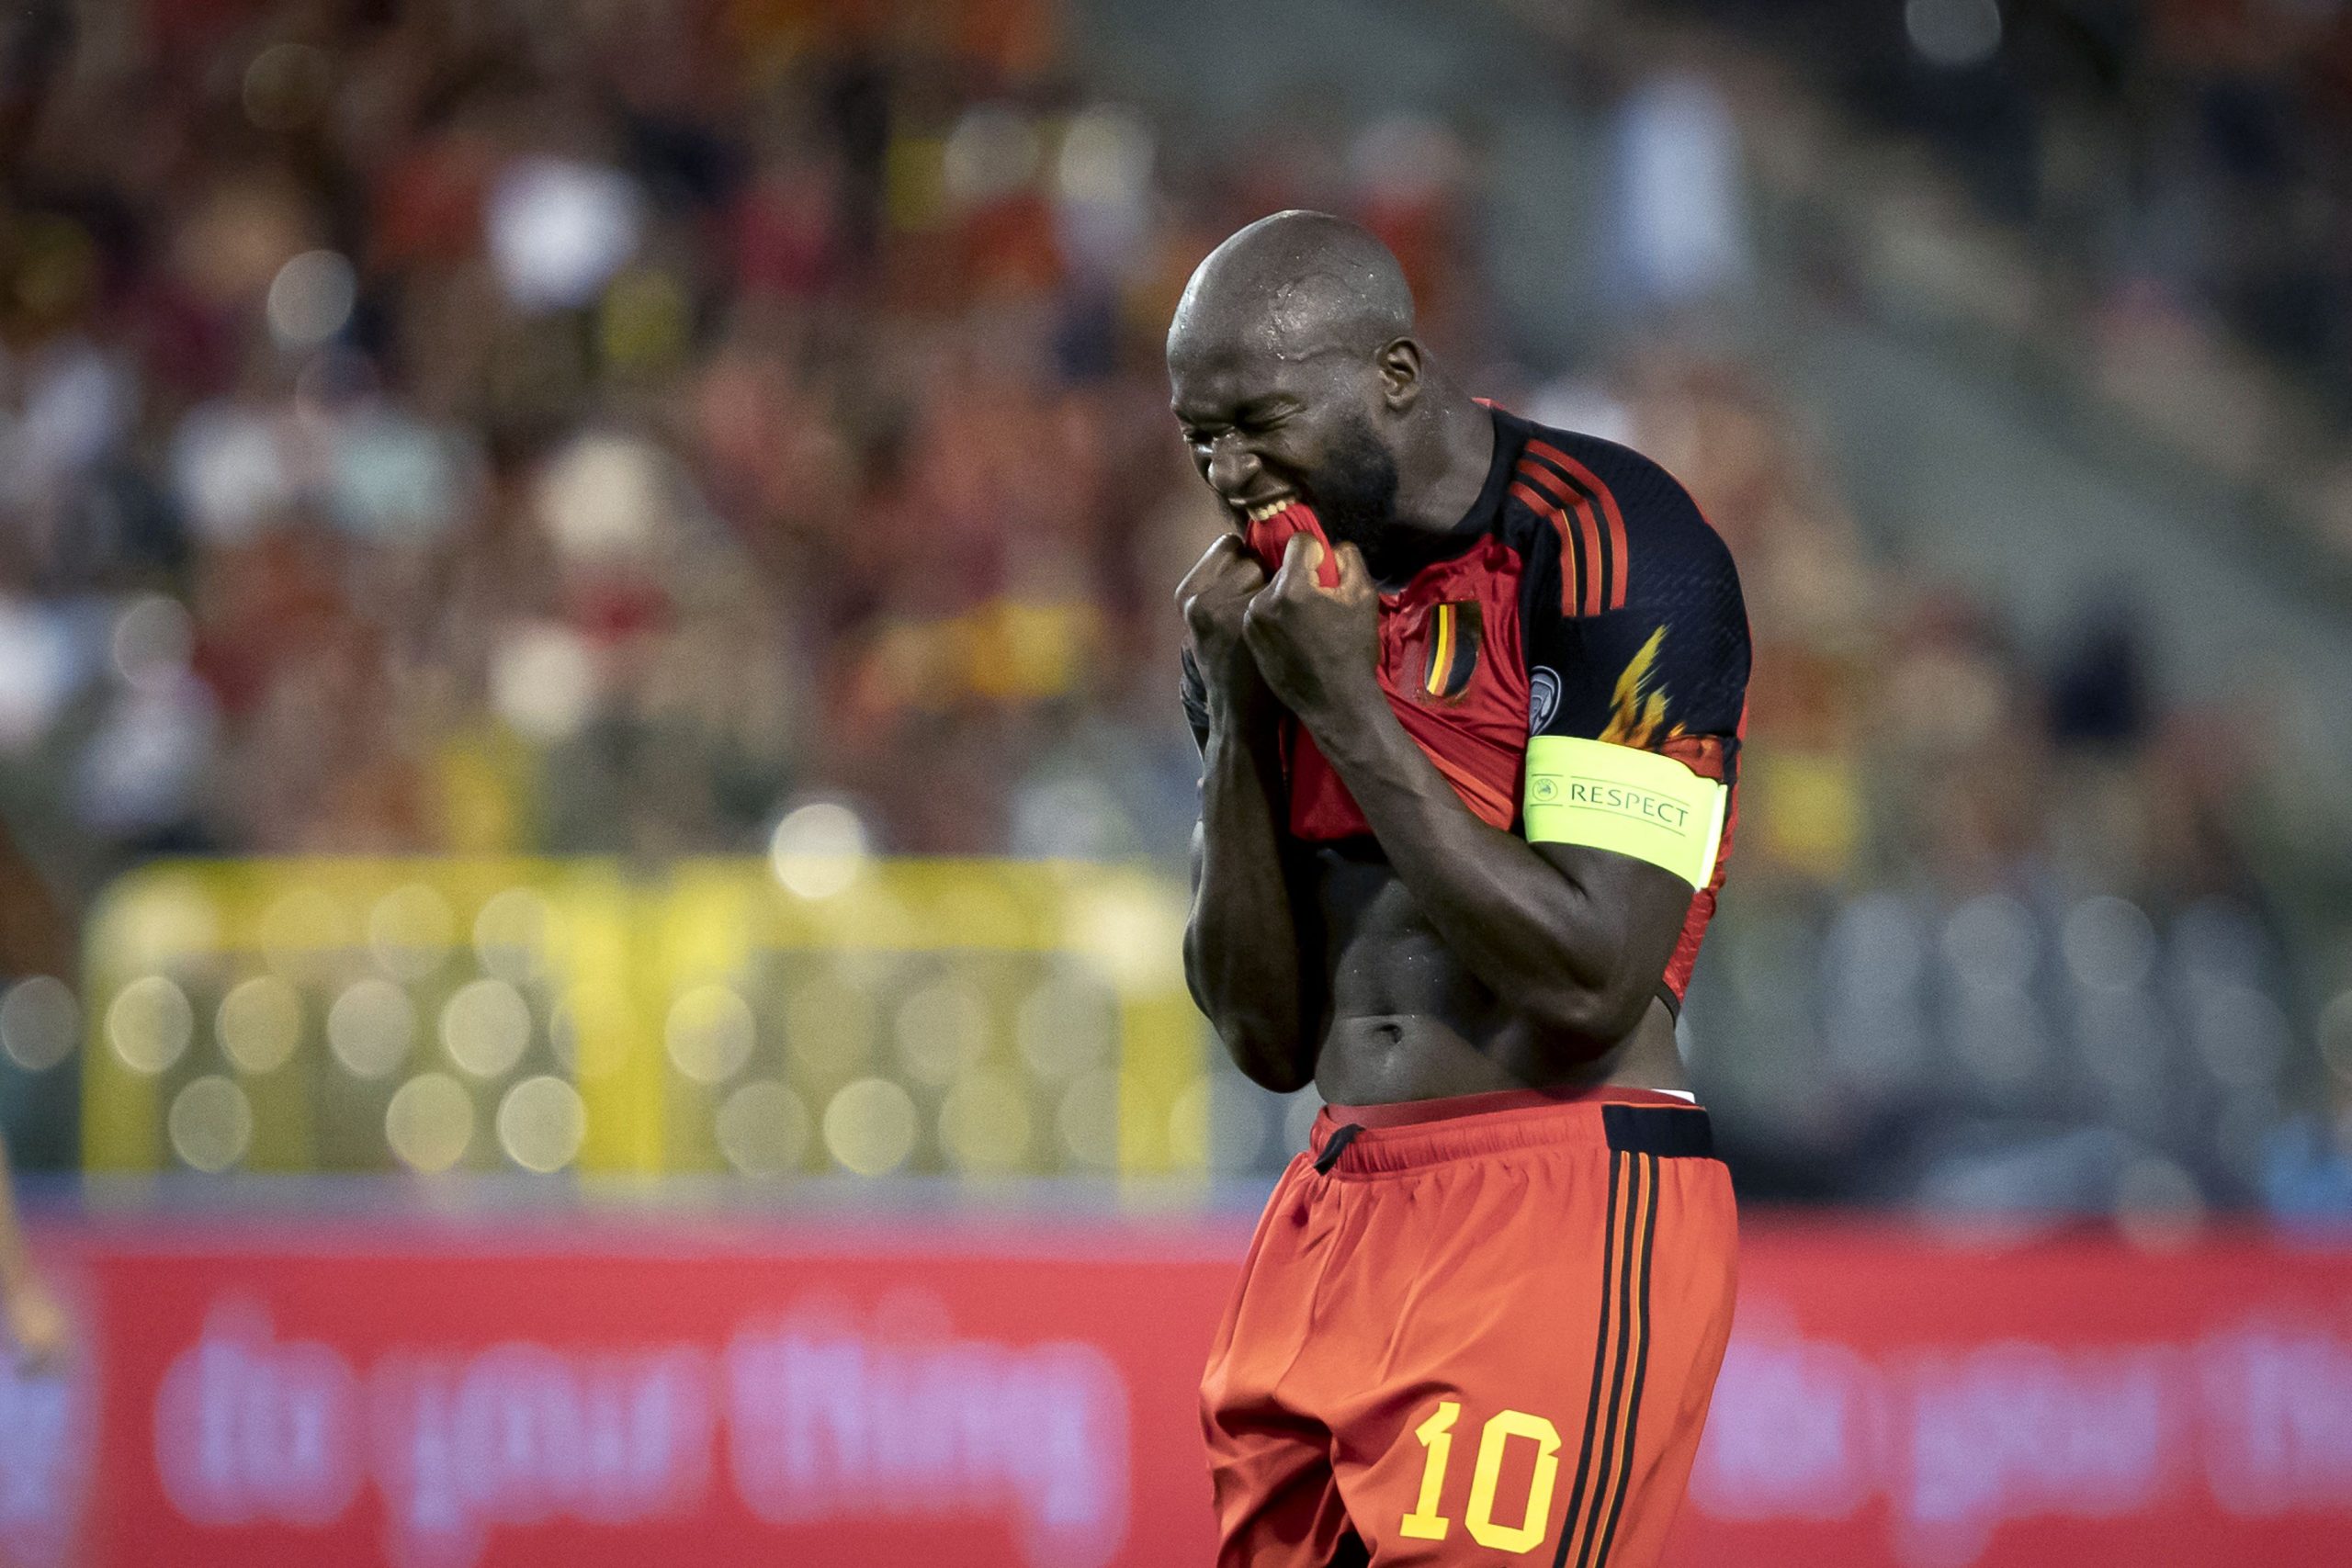 Fabrizio Romano says AS Roma may find it difficult to sign Chelsea loanee Romelu Lukaku even if they secure Champions League spot